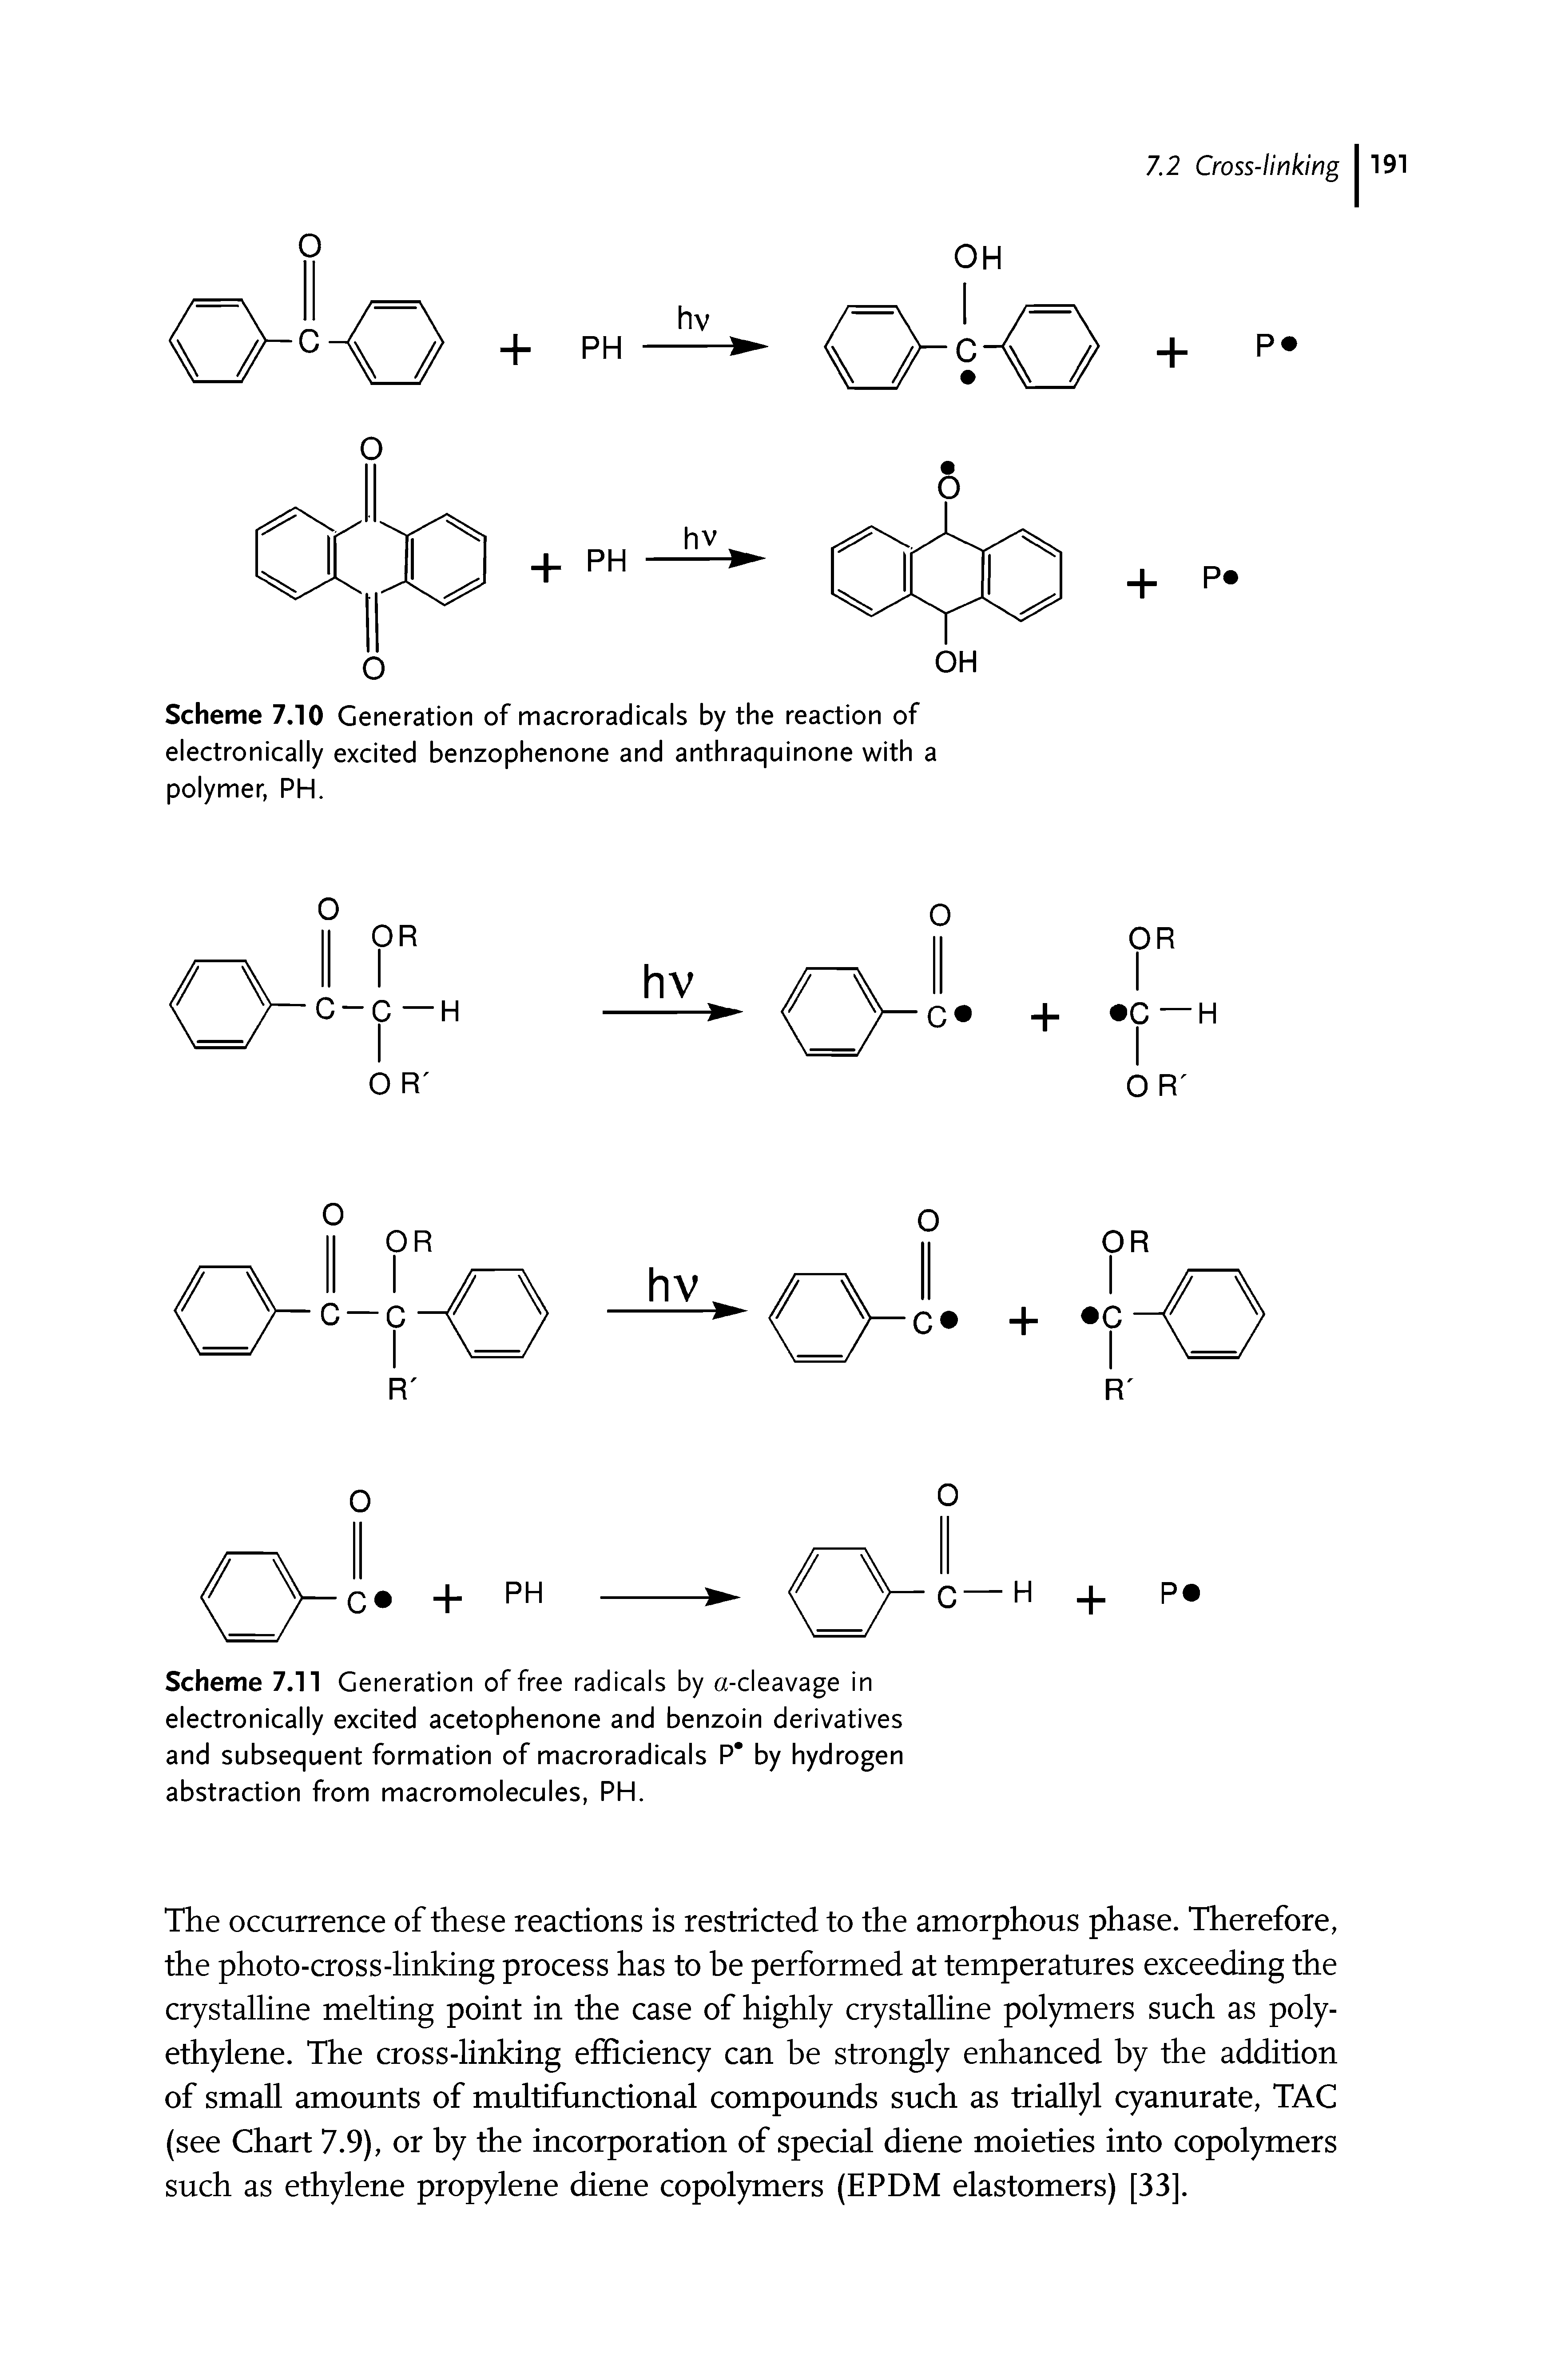 Scheme 7.11 Generation of free radicals by a-cleavage in electronically excited acetophenone and benzoin derivatives and subsequent formation of macroradicals P by hydrogen abstraction from macromolecules, PH.